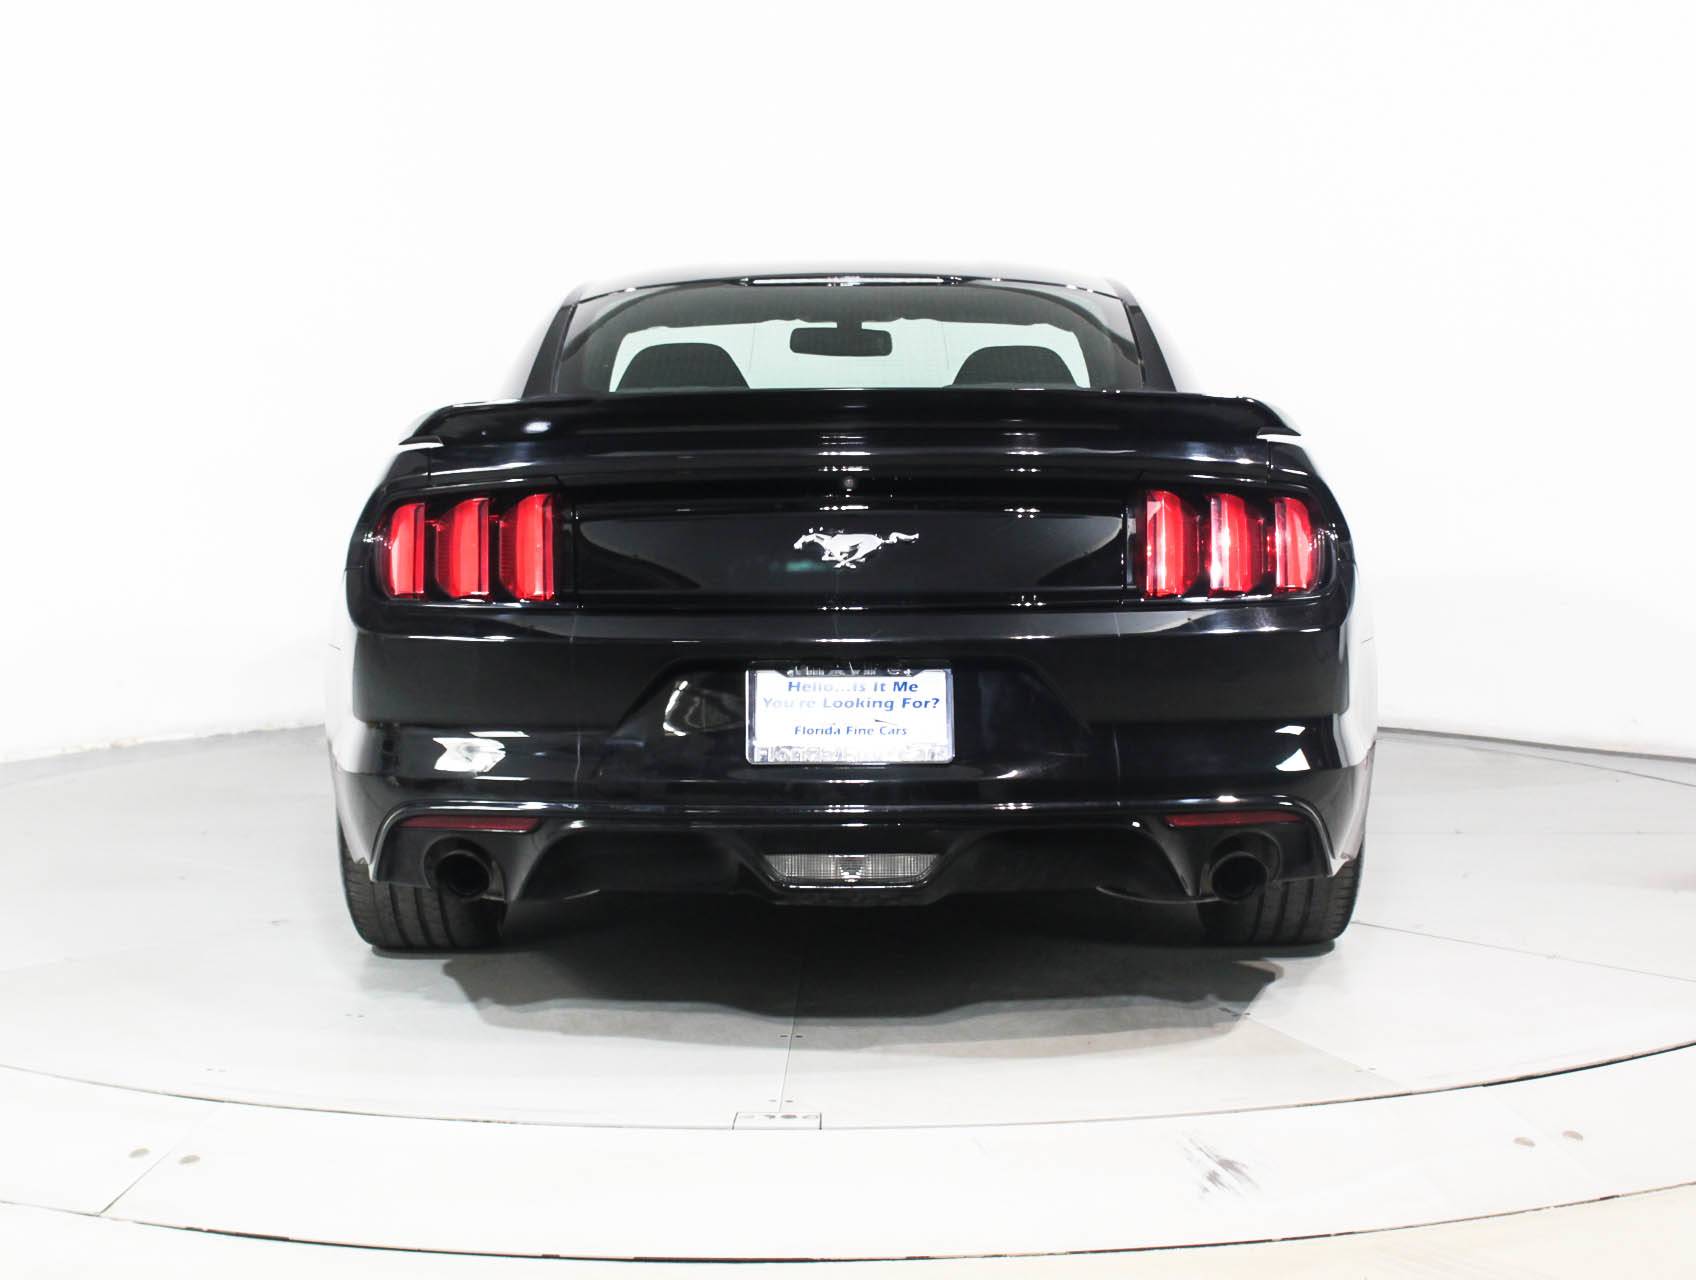 Florida Fine Cars - Used FORD MUSTANG 2015 MIAMI ECOBOOST